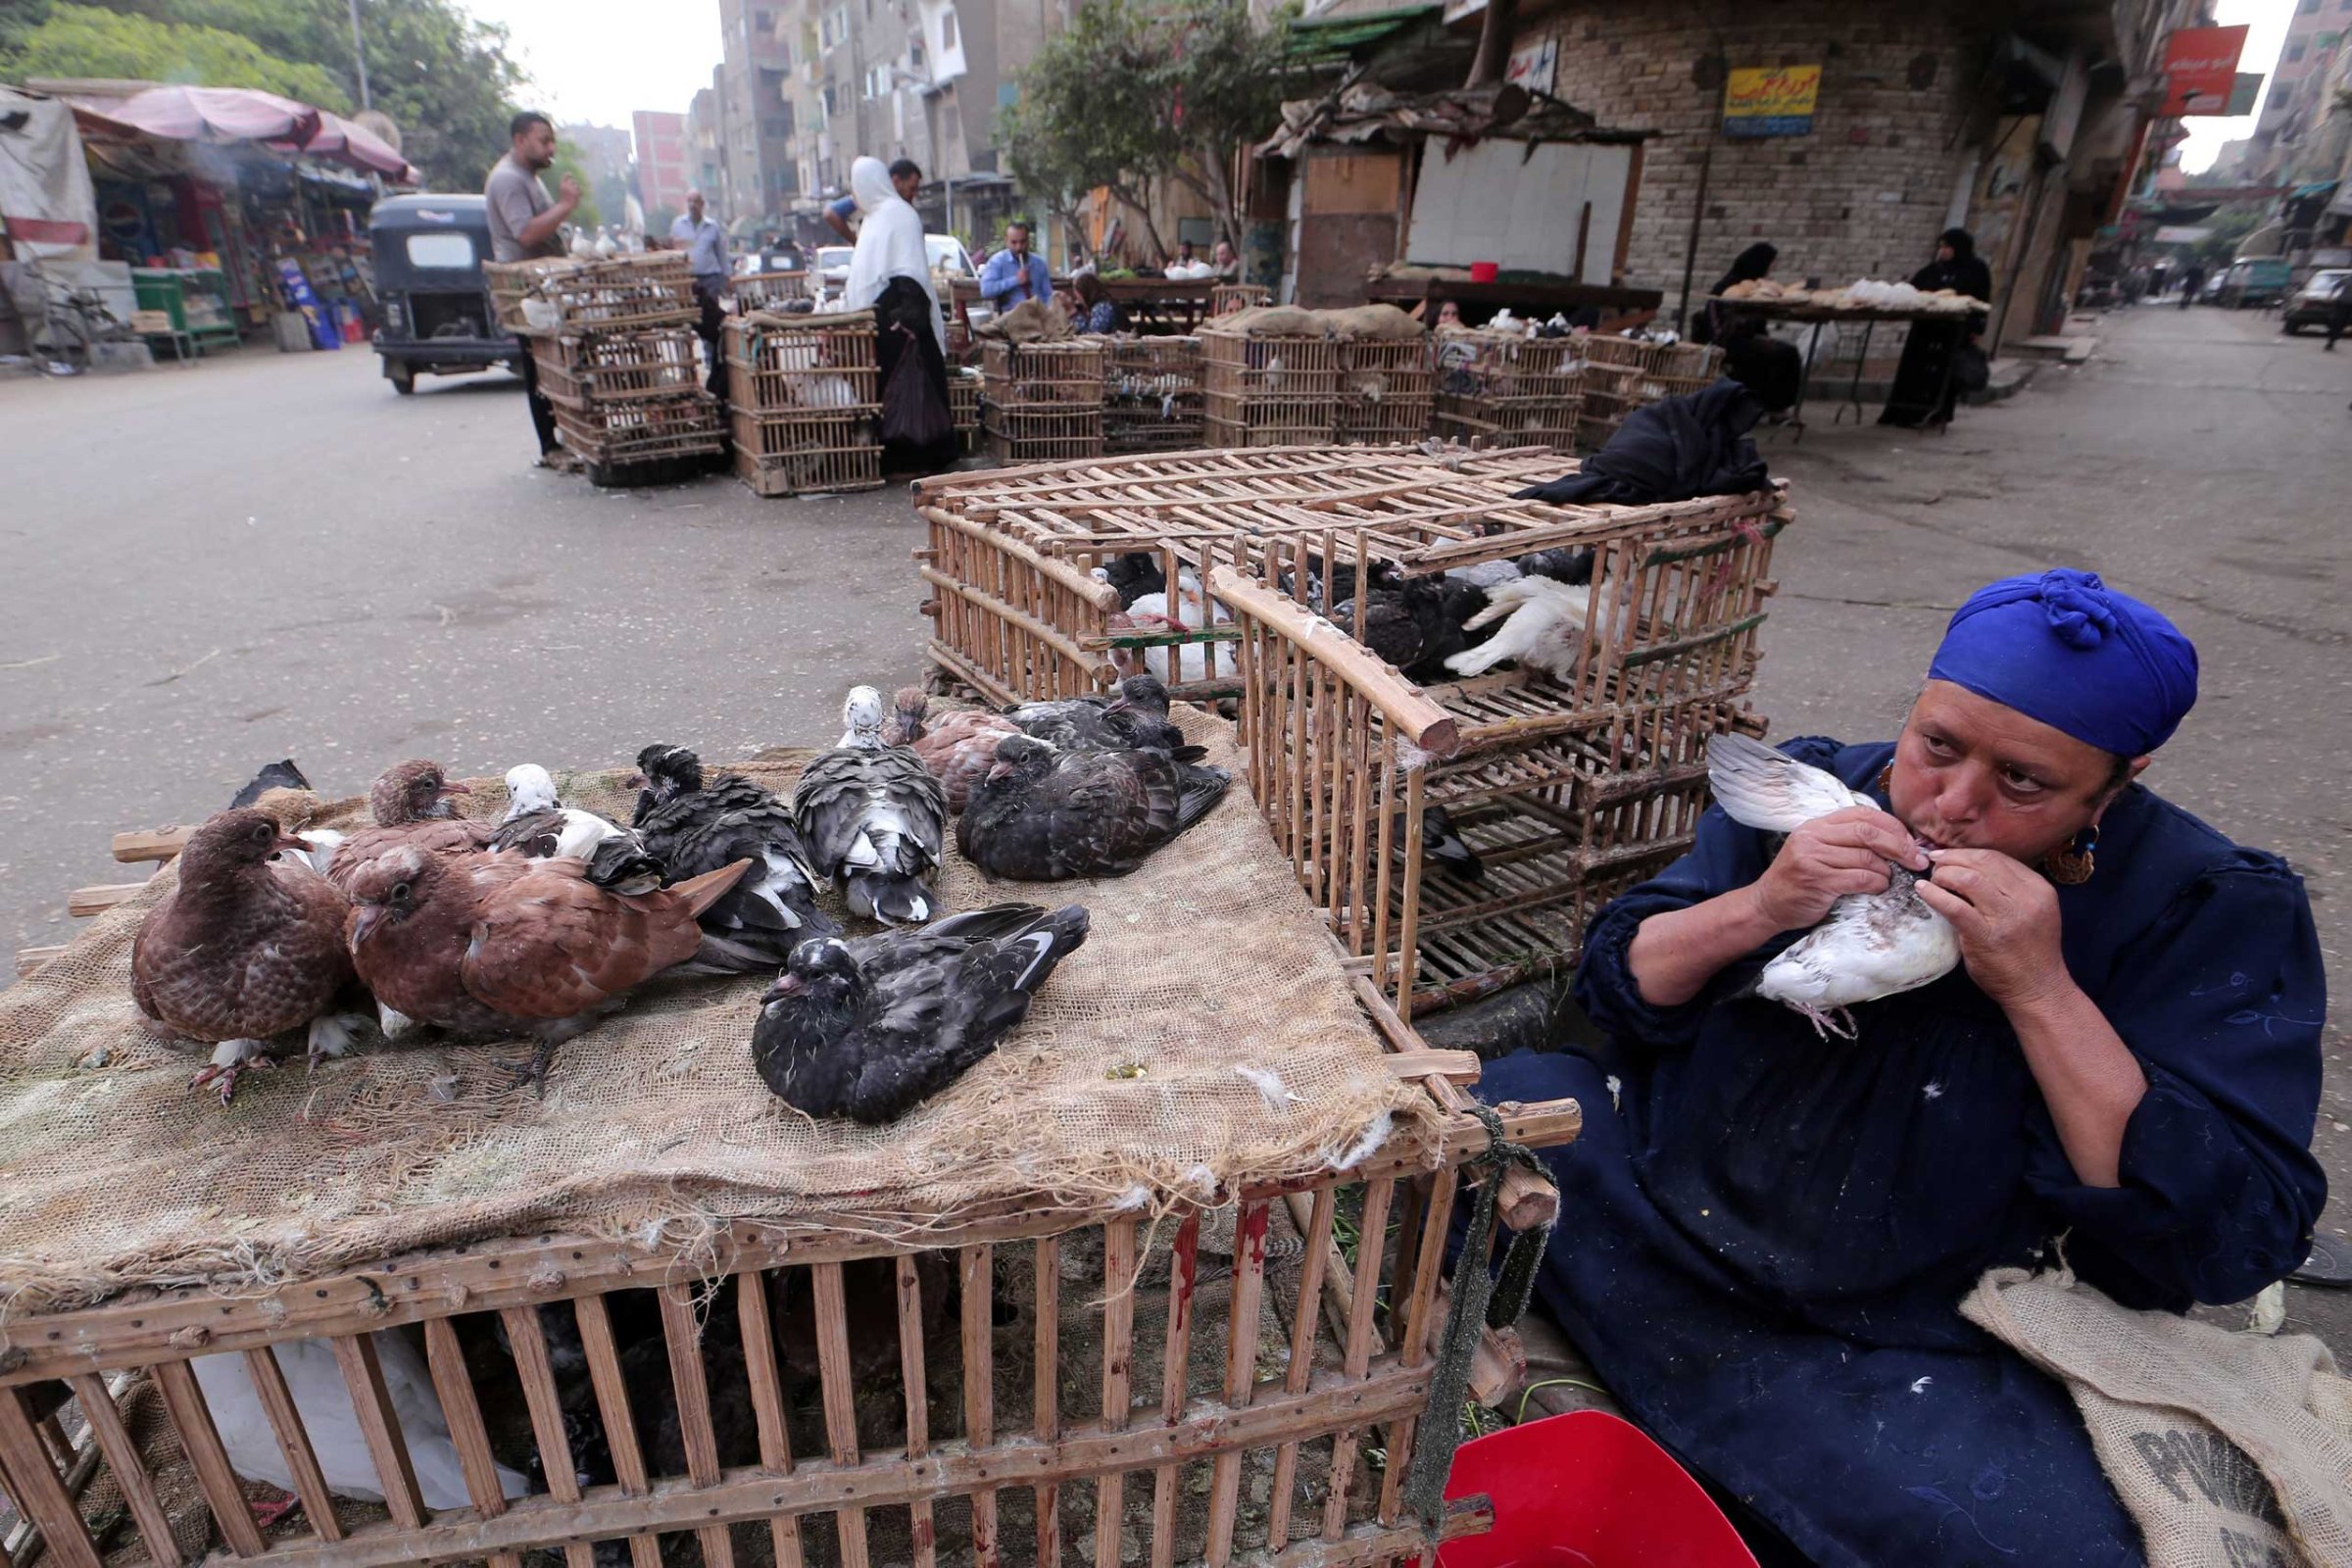 A poultry merchant feeds a pigeon from her mouth in a popular market in Cairo, Egypt, Nov. 19 2014.